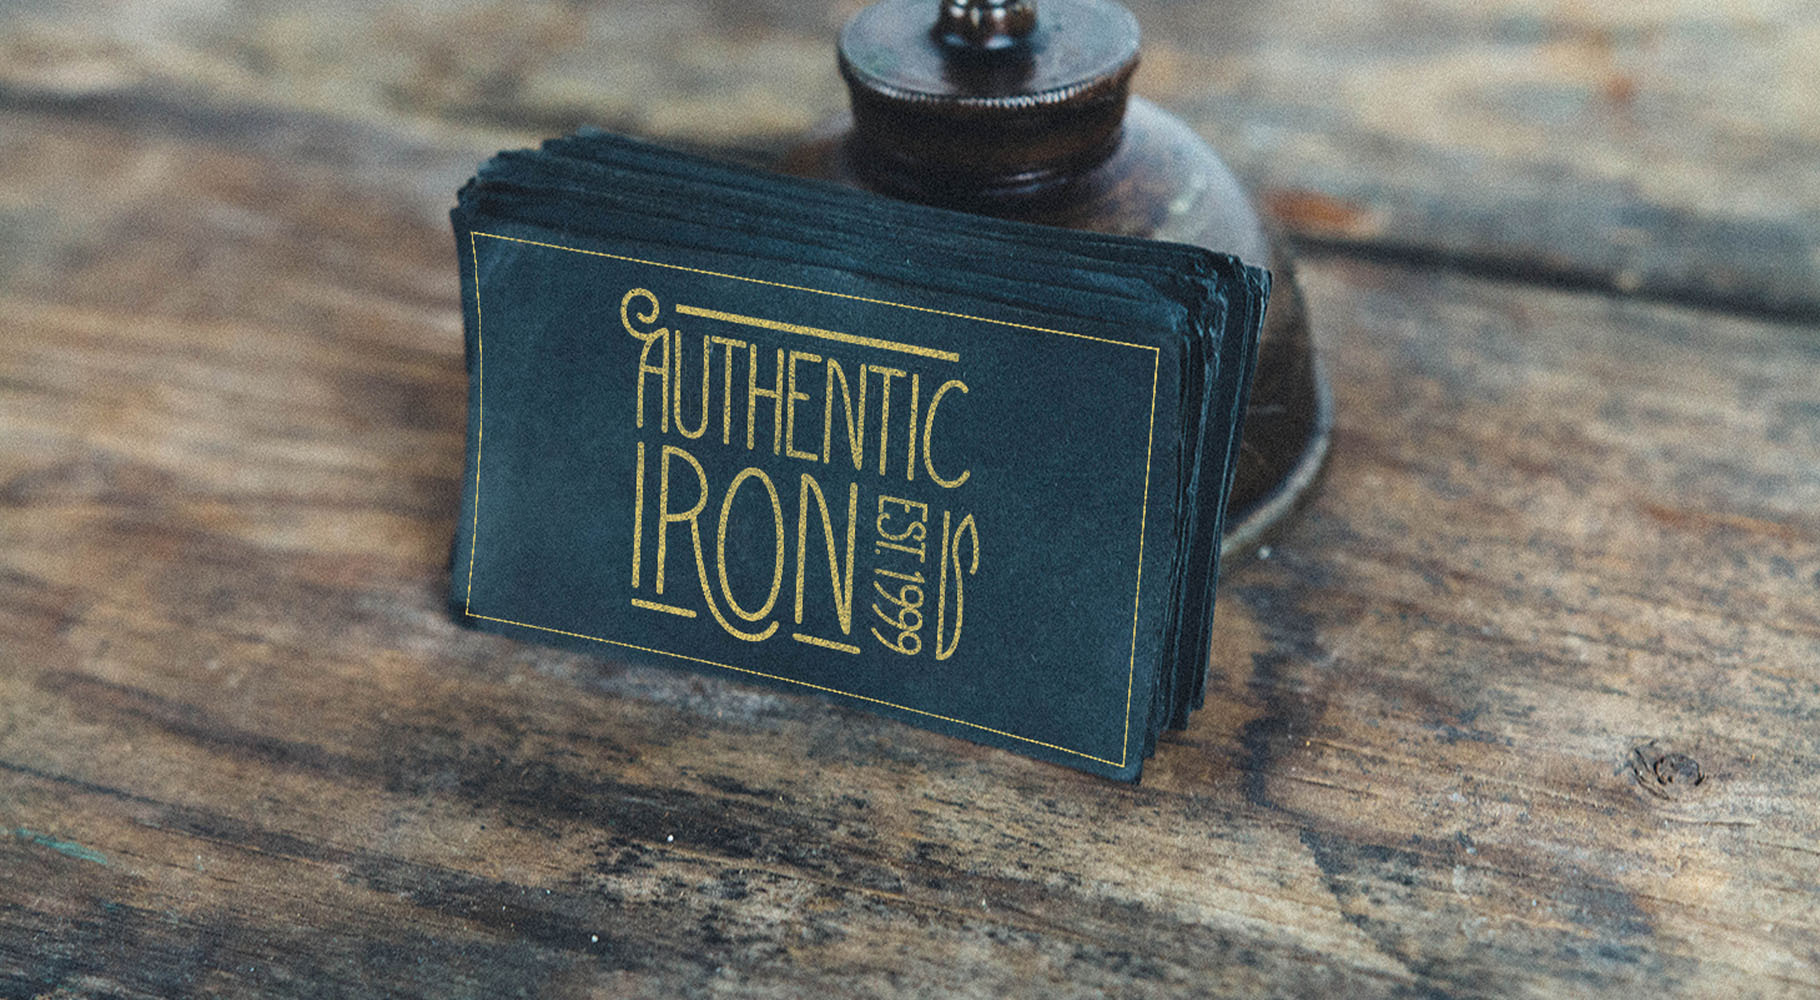 An image of a business card for Authentic Iron.